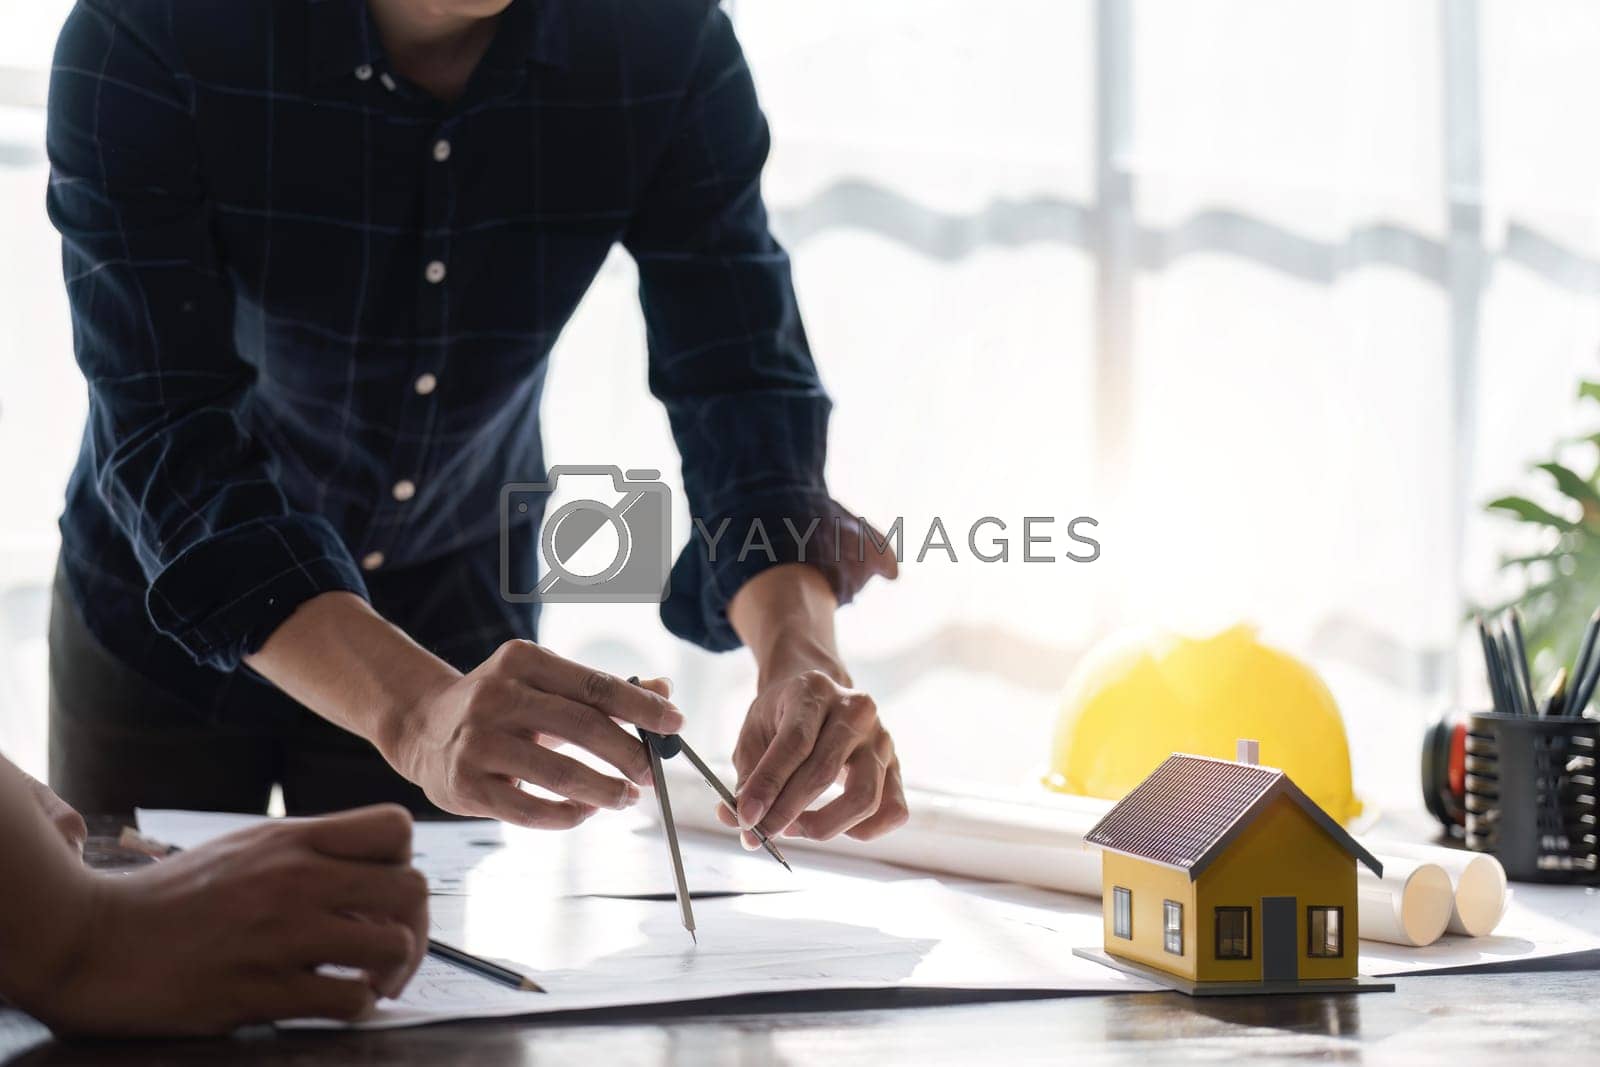 Royalty free image of engineer team planning design house, modifying plan, creating construction project and addition according to customer requirement by nateemee